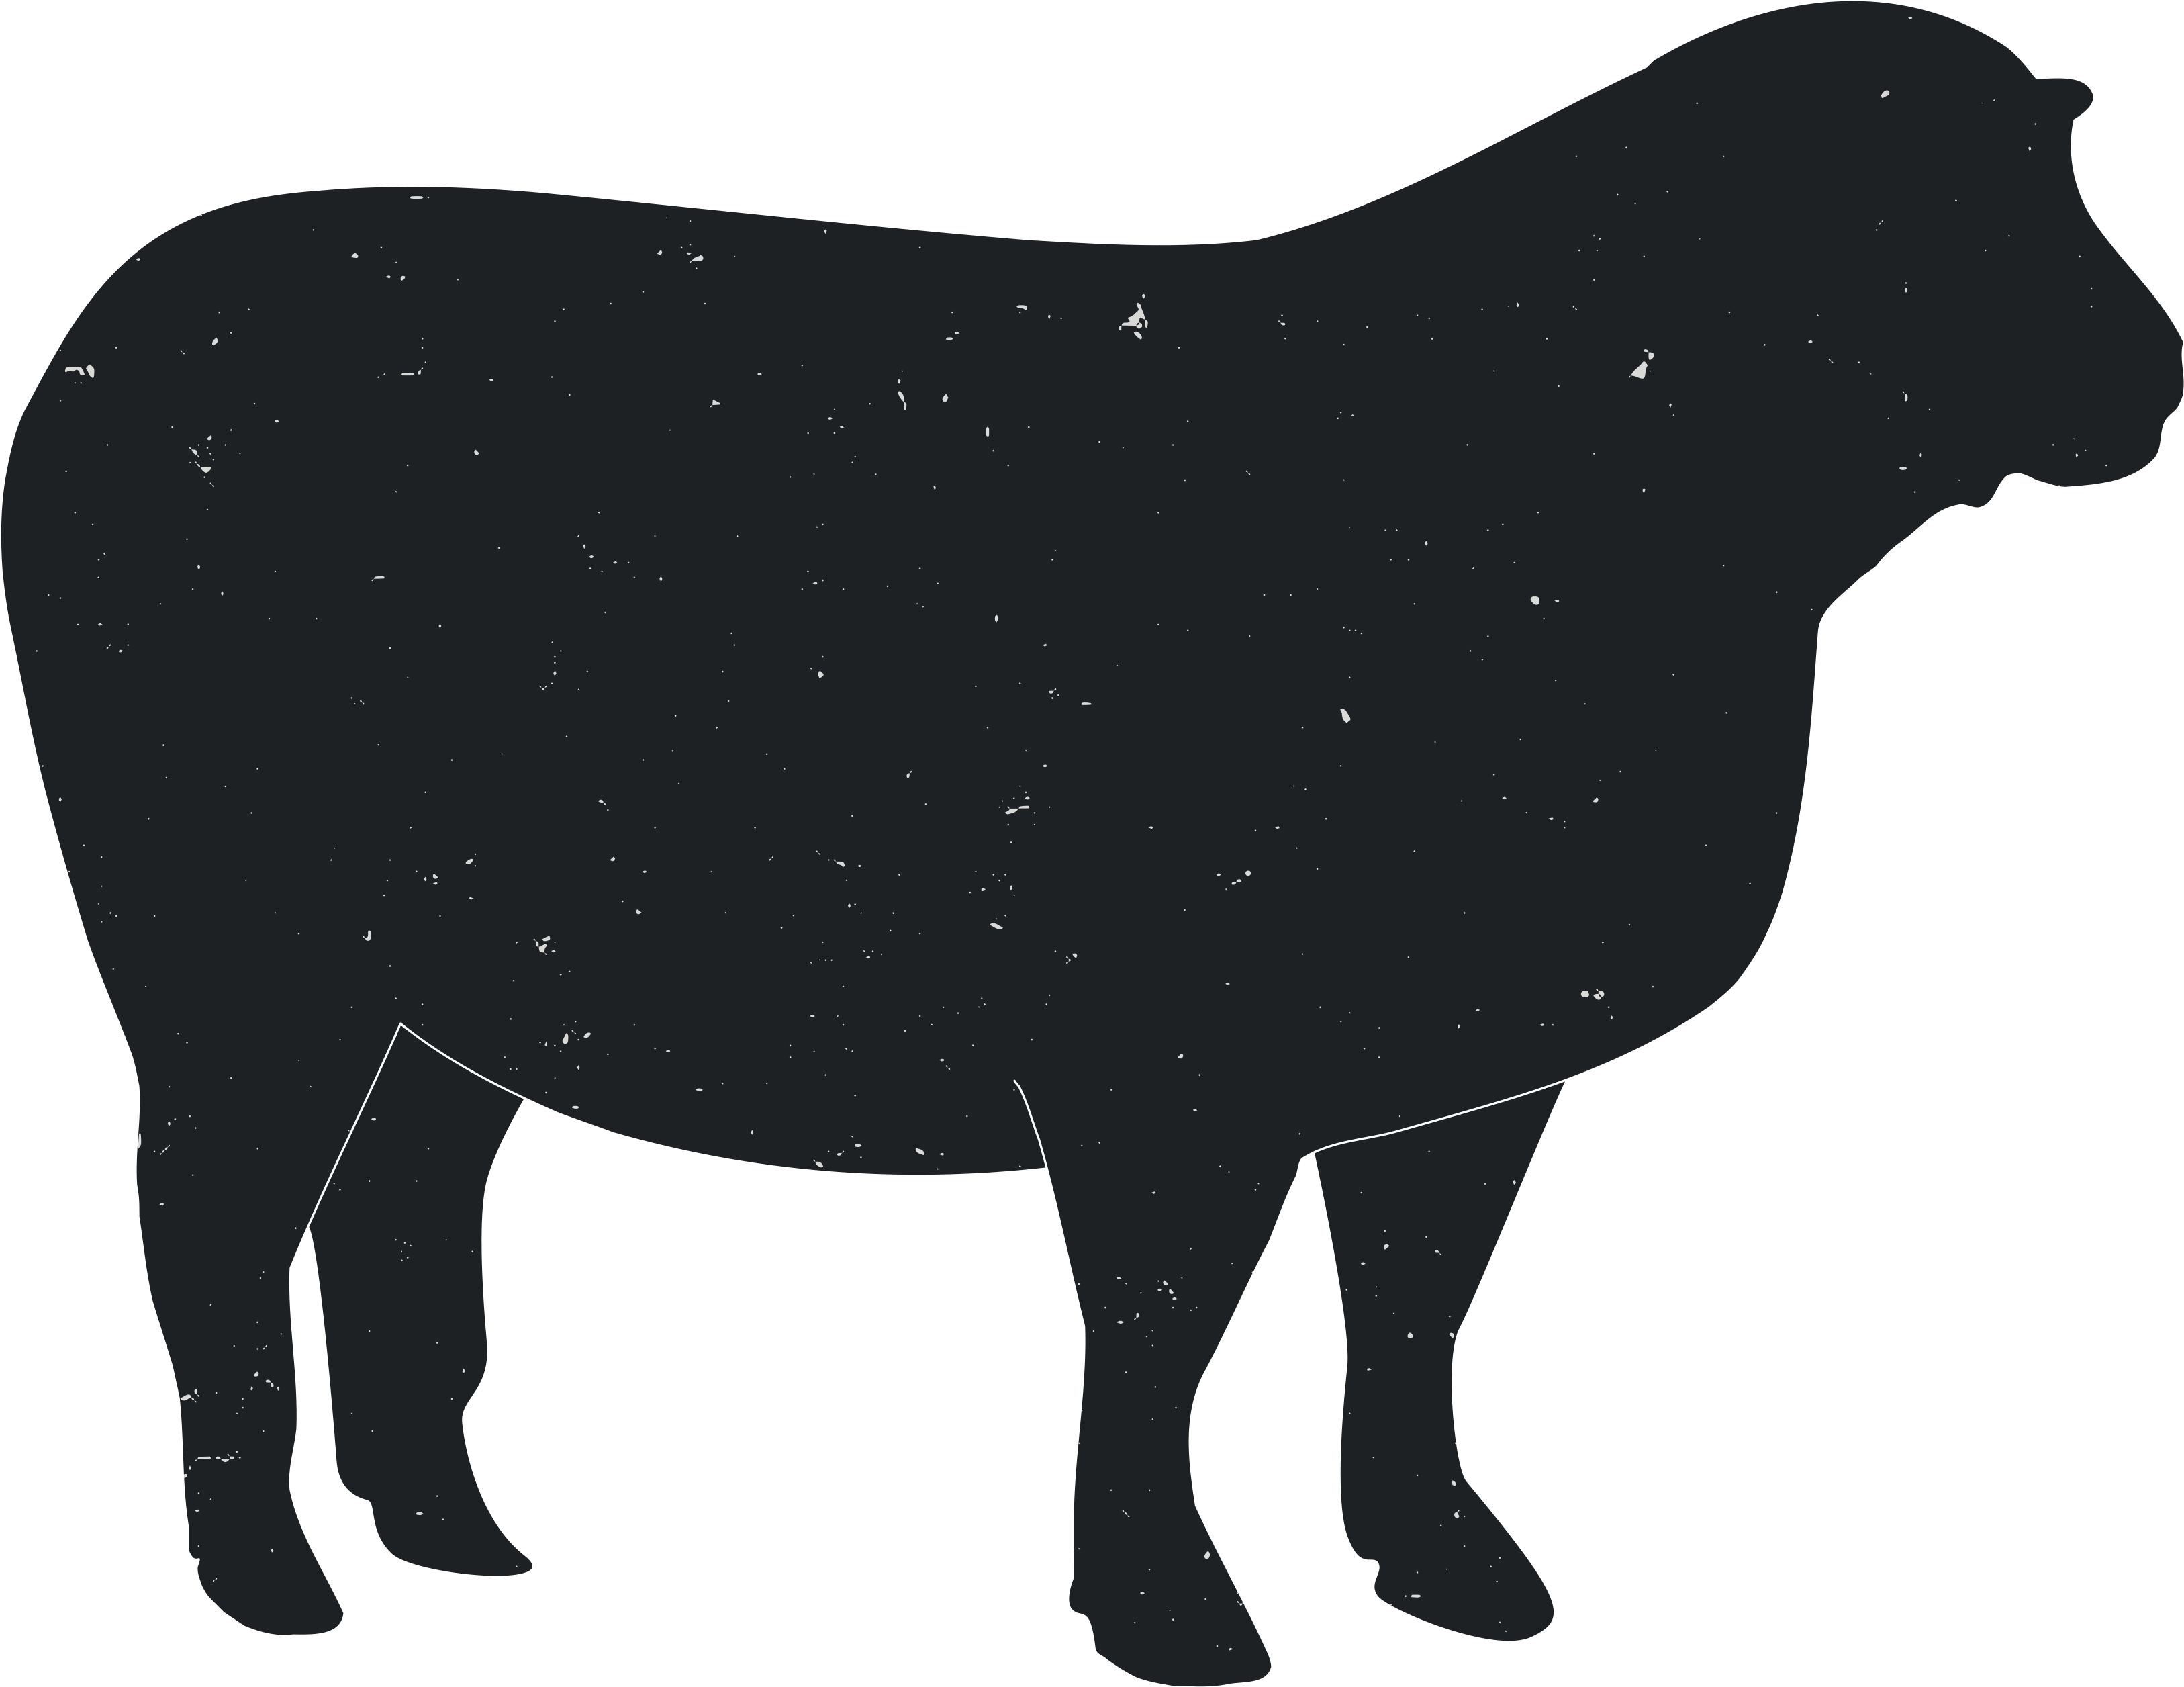 Cattle Ox Animal Silhouettes Transprent Png Free Ⓒ - Cattle Ox Animal Silhouettes Transprent Png Free Ⓒ (3600x3600)